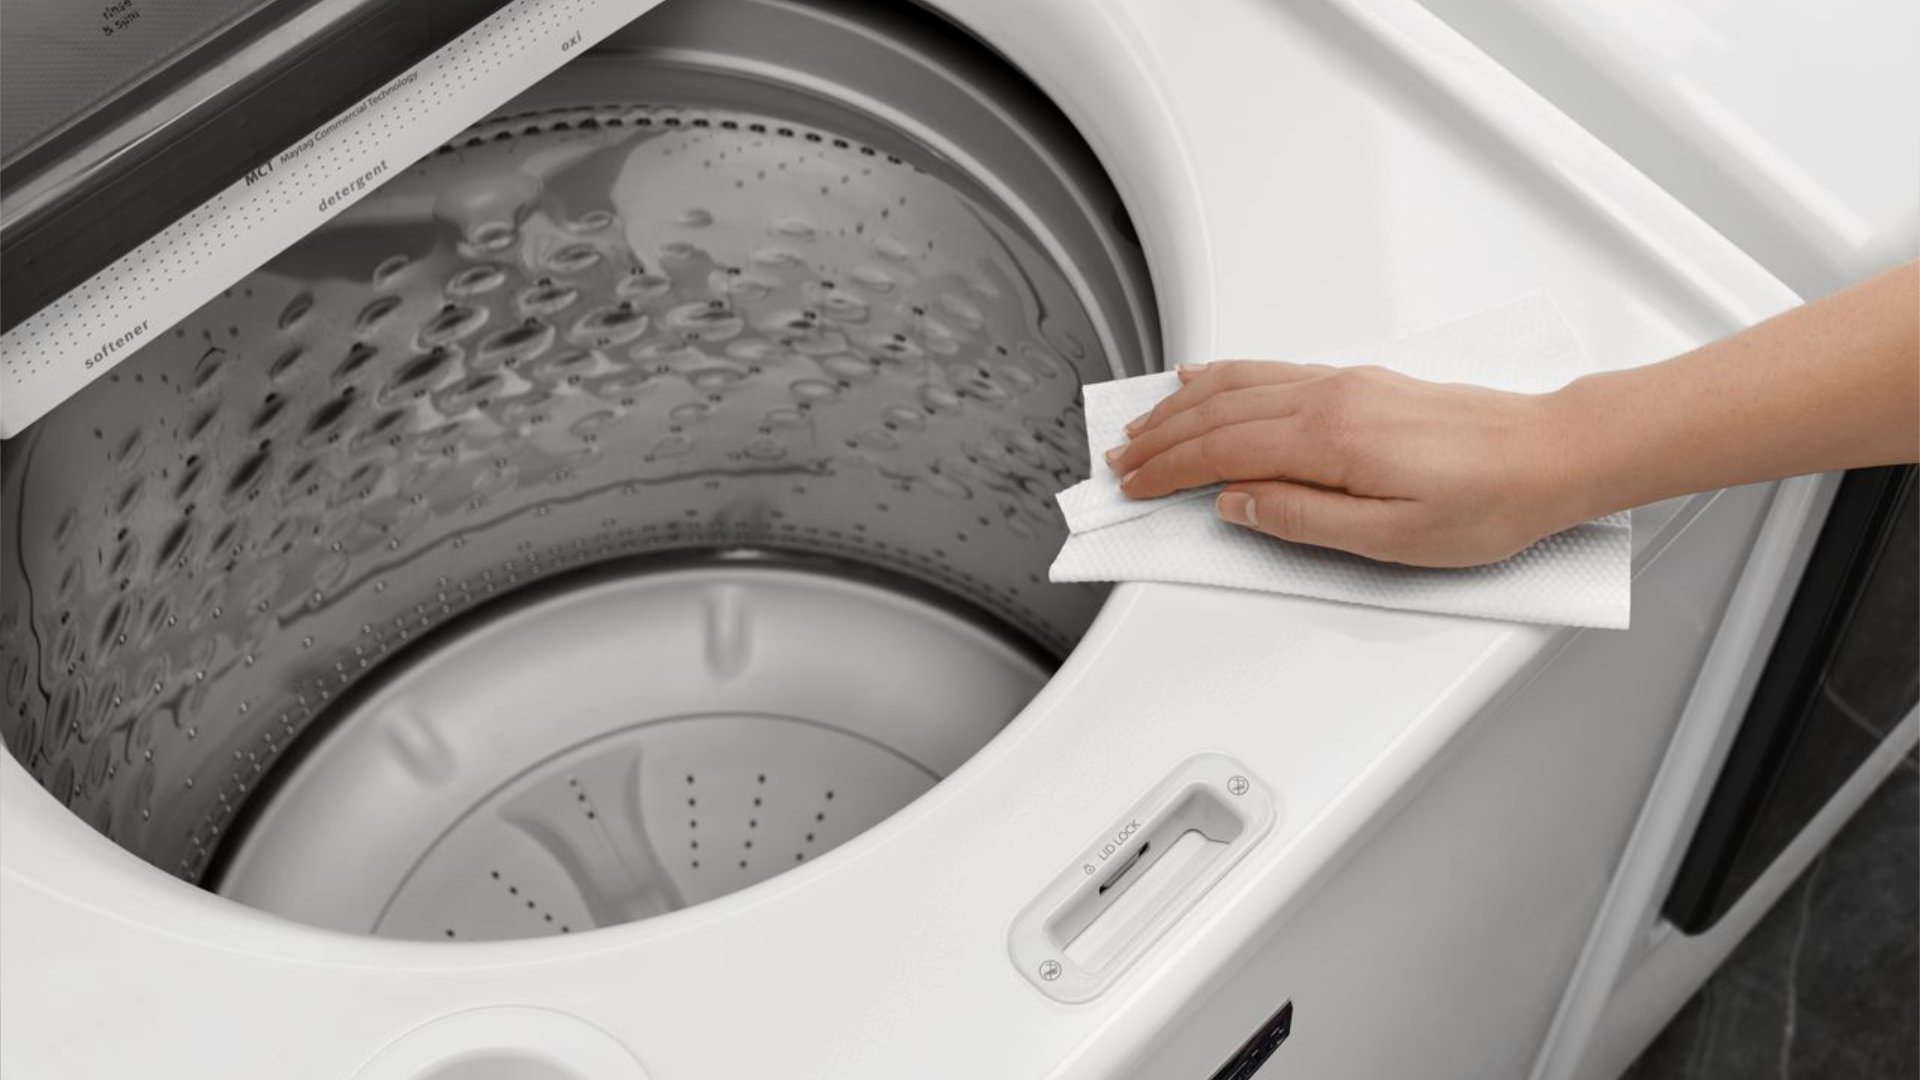 Featured image for “How to Clean a Whirlpool Washing Machine”